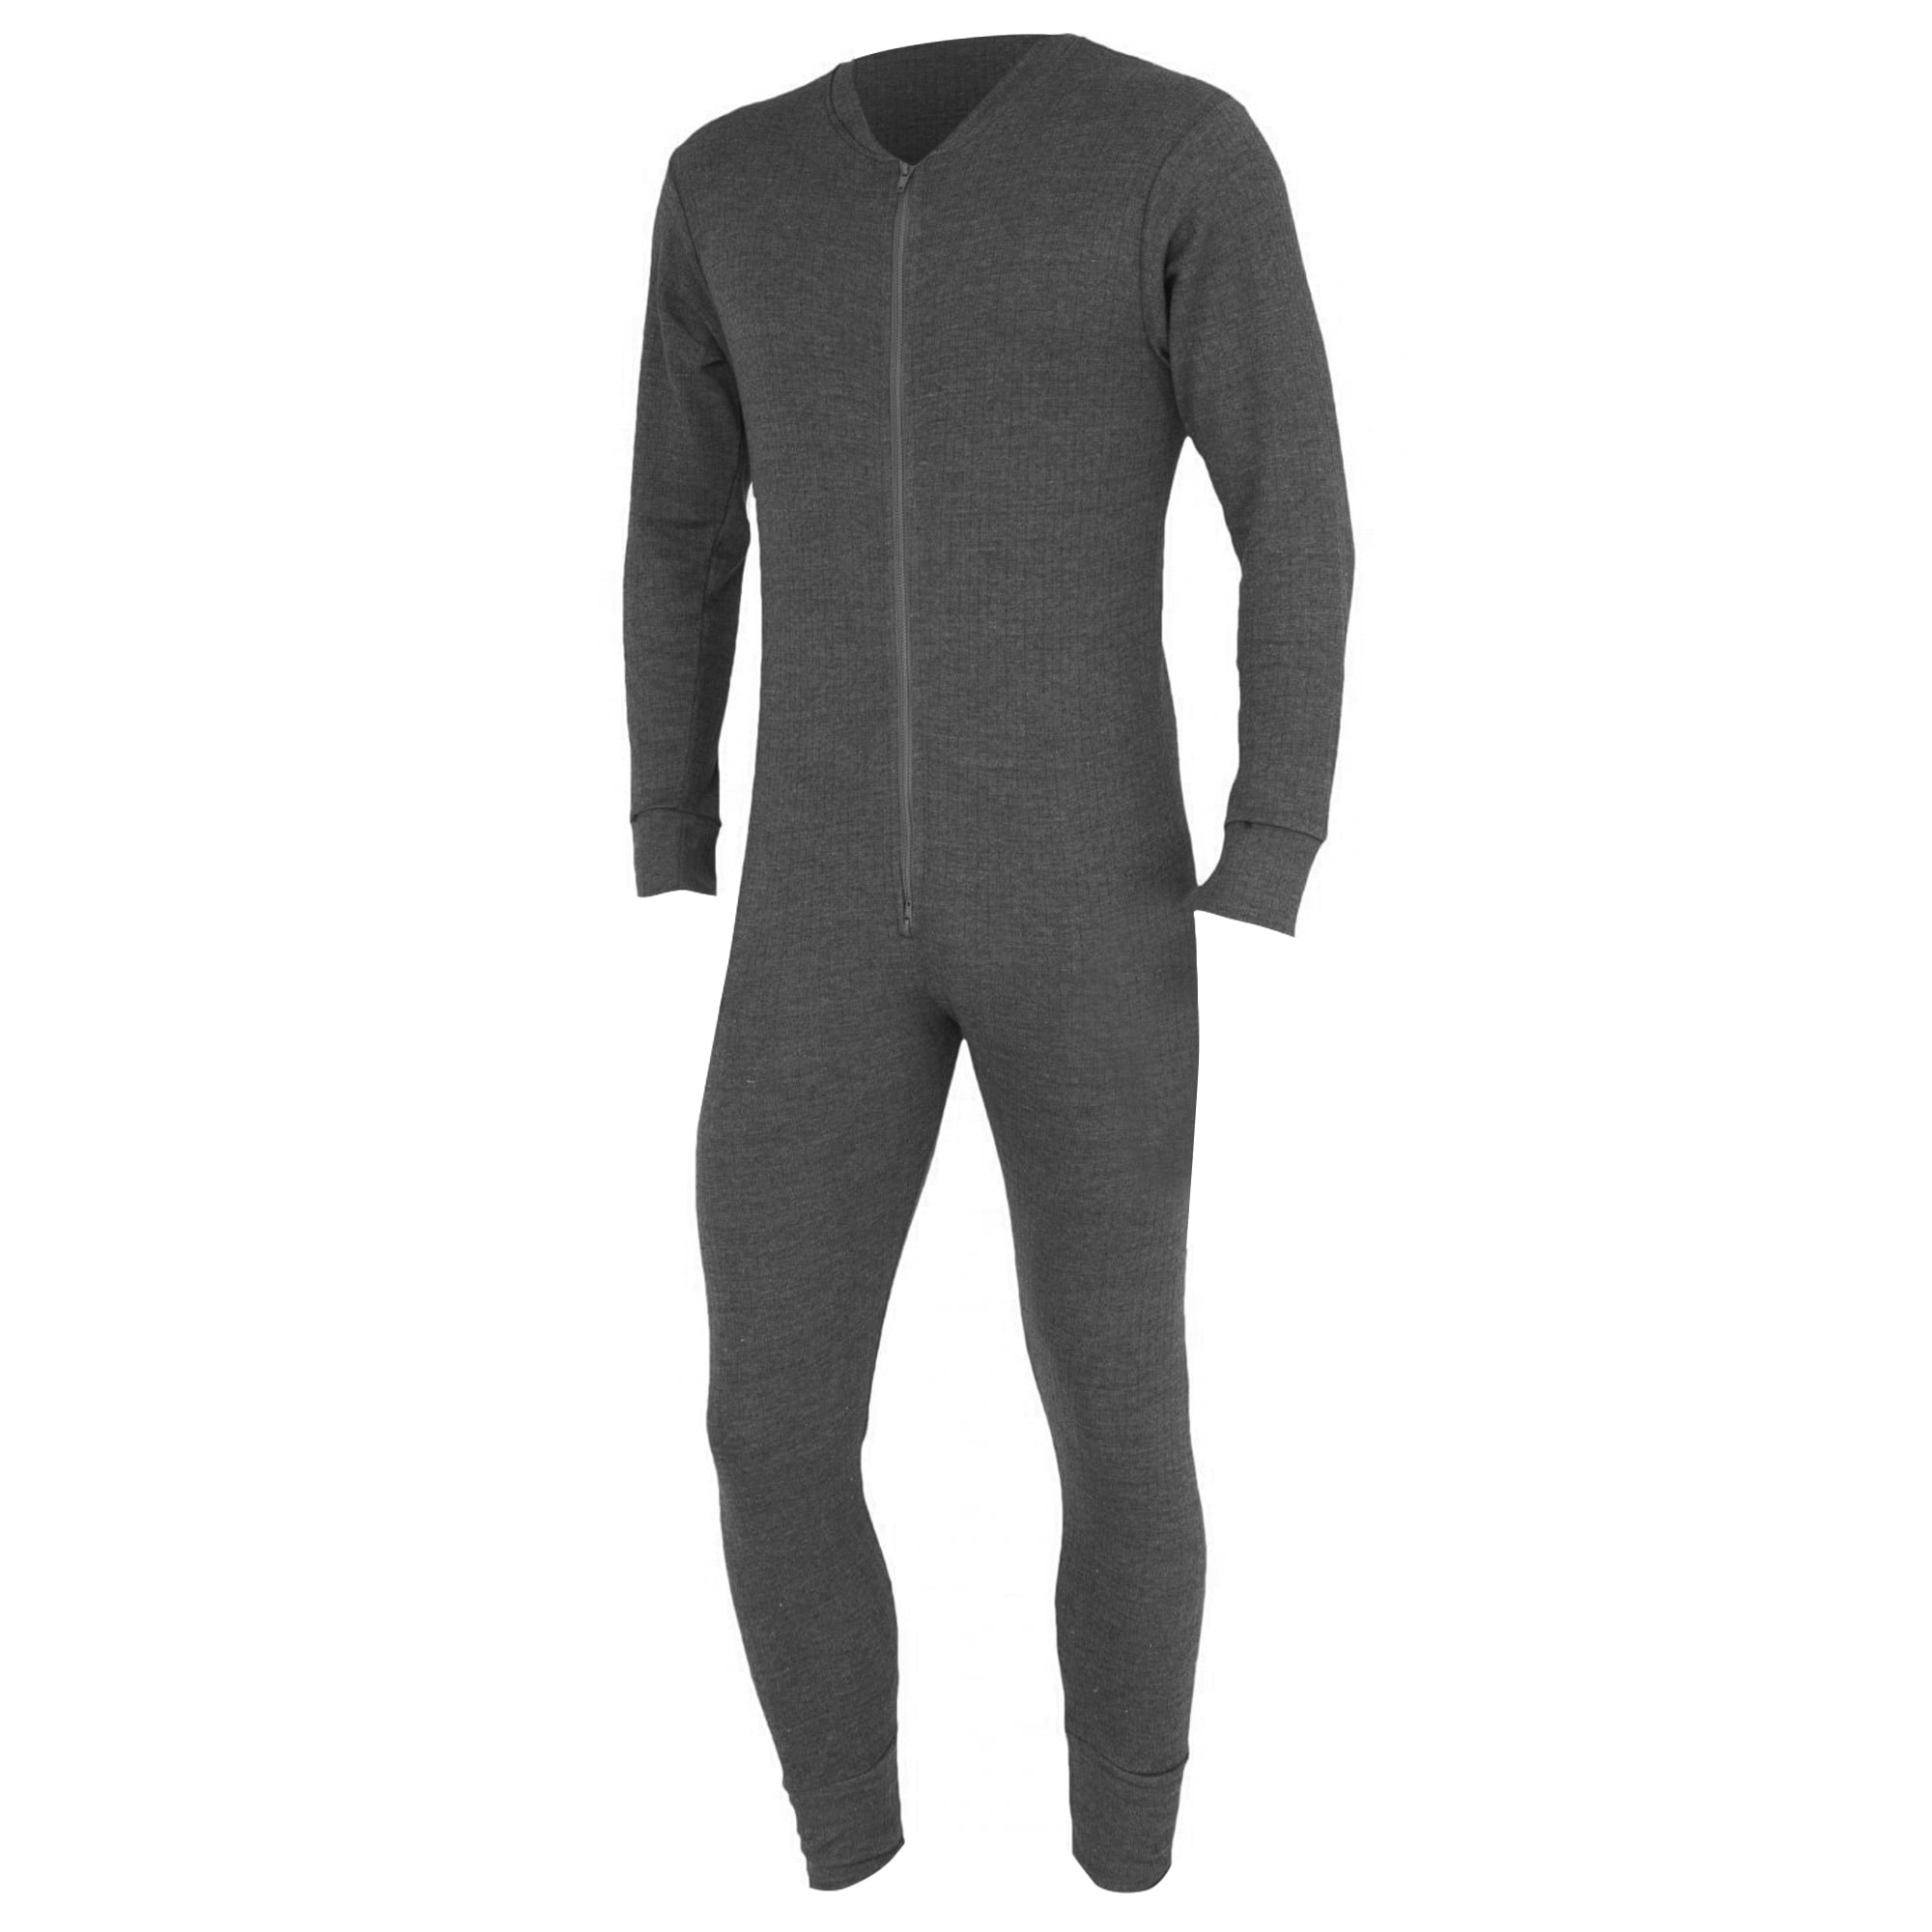 FLOSO Mens Thermal Underwear All In One Union Suit - Walmart.com